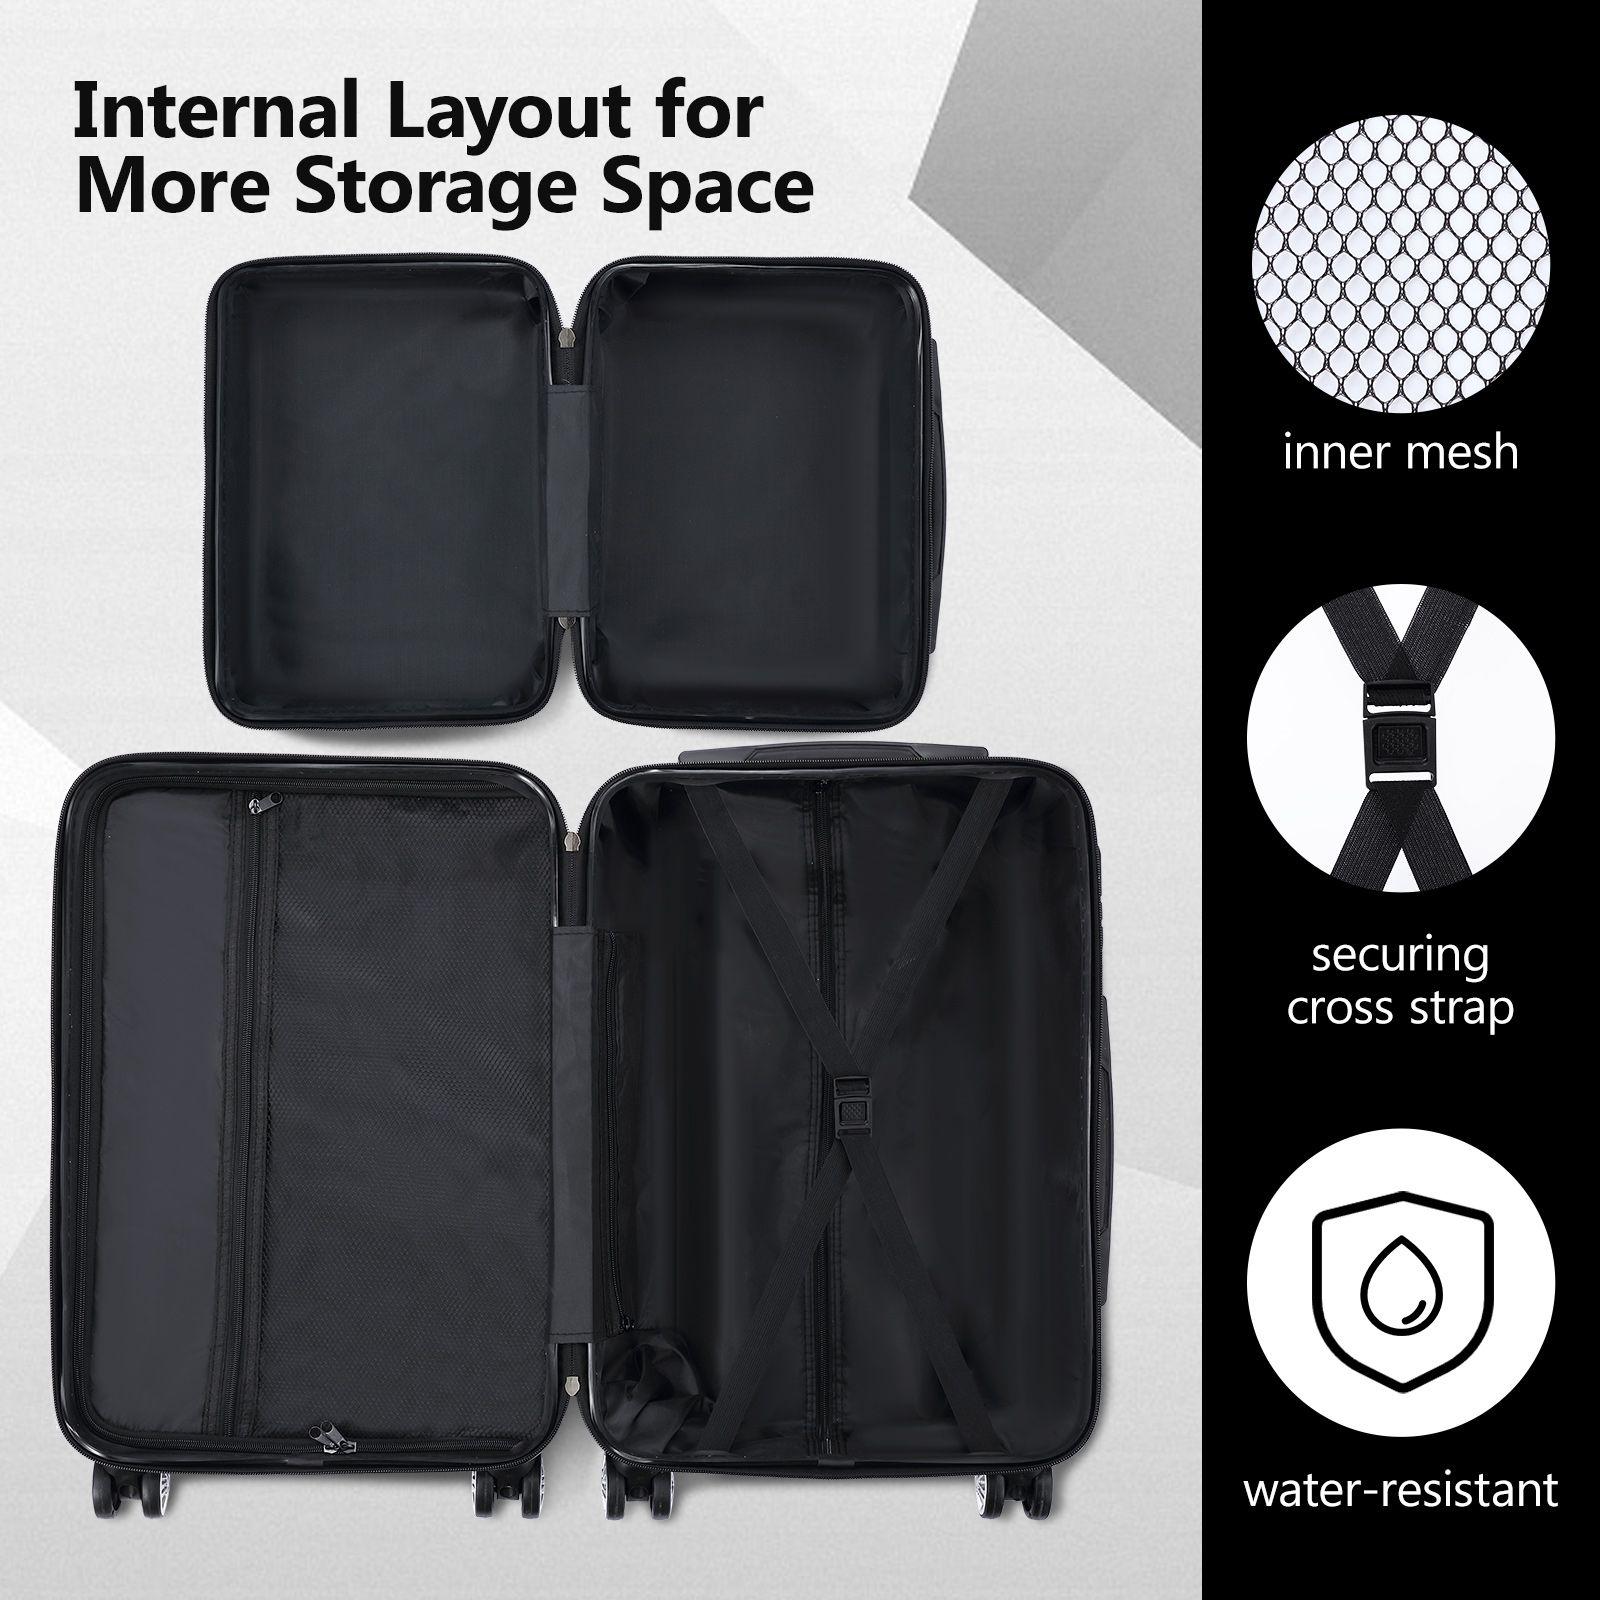 2 Piece Luggage Set Carry On Hard Shell Travel Suitcases Traveller ...